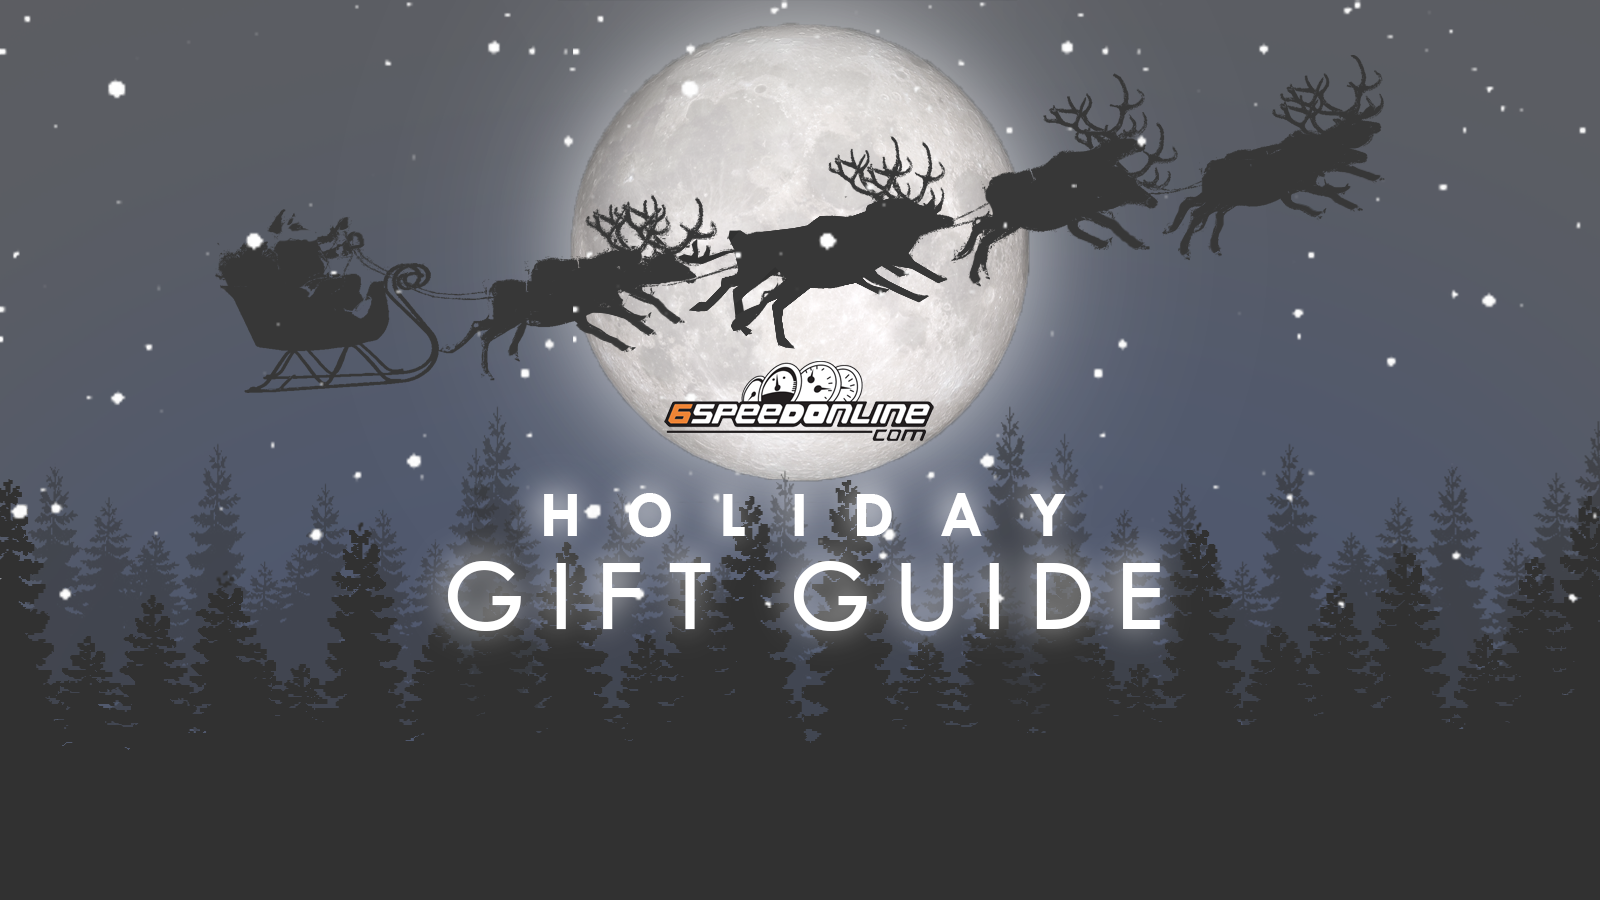 ‘6Speed Online’ 2023 Holiday Gift Guide Is Here! Save on Performance Upgrades, Detailing Supplies, & More!